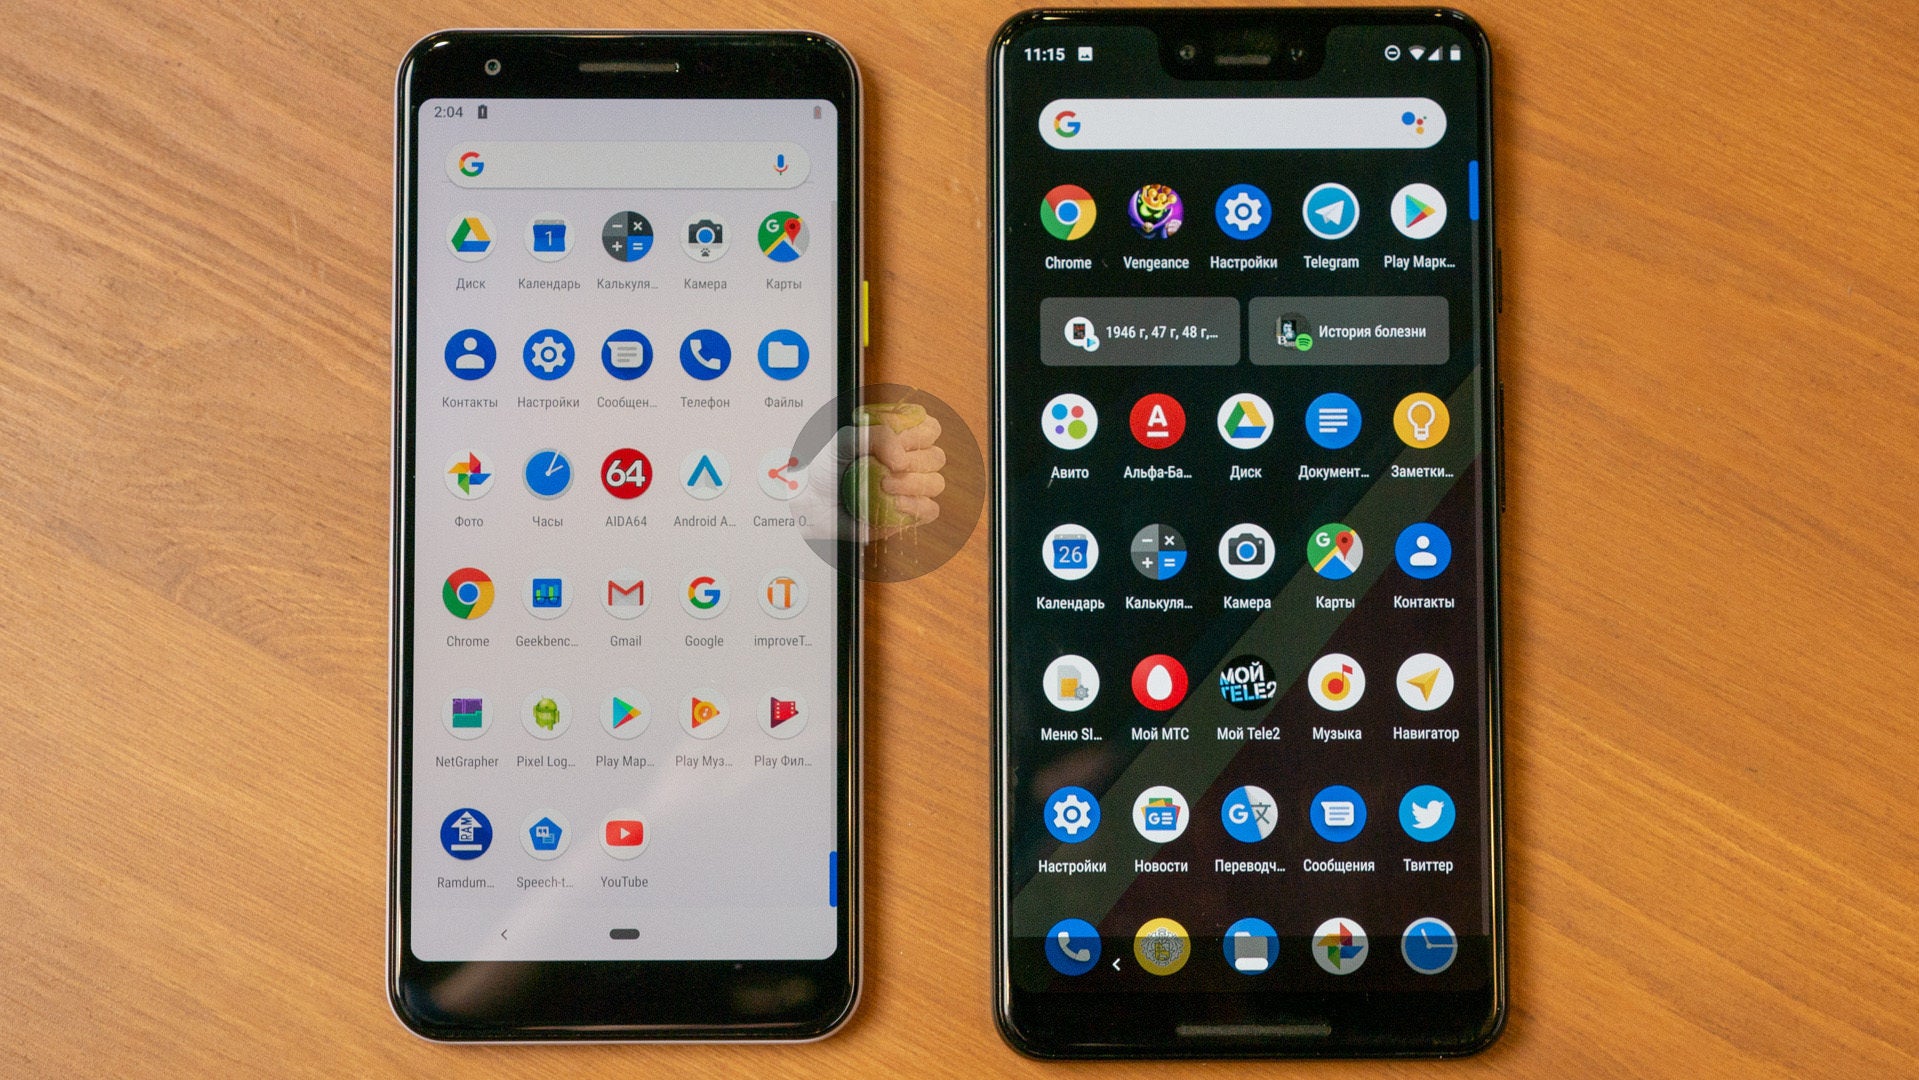 Google Pixel 3a vs. Google Pixel 3 XL - The Google Pixel 3a series could cost a pretty penny in Europe